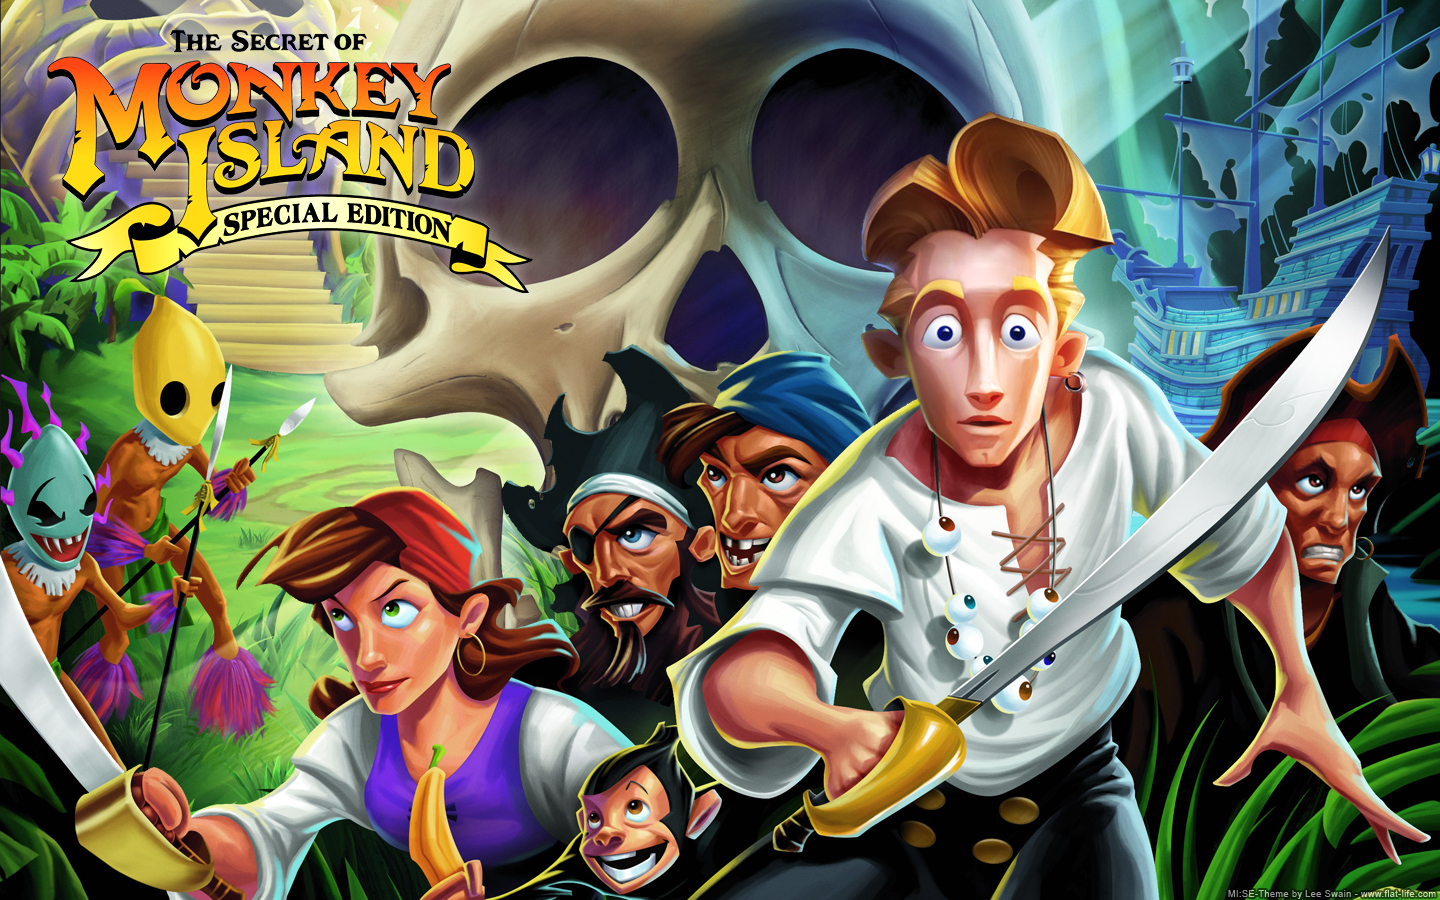 Monkey Island Special Edition goes retail